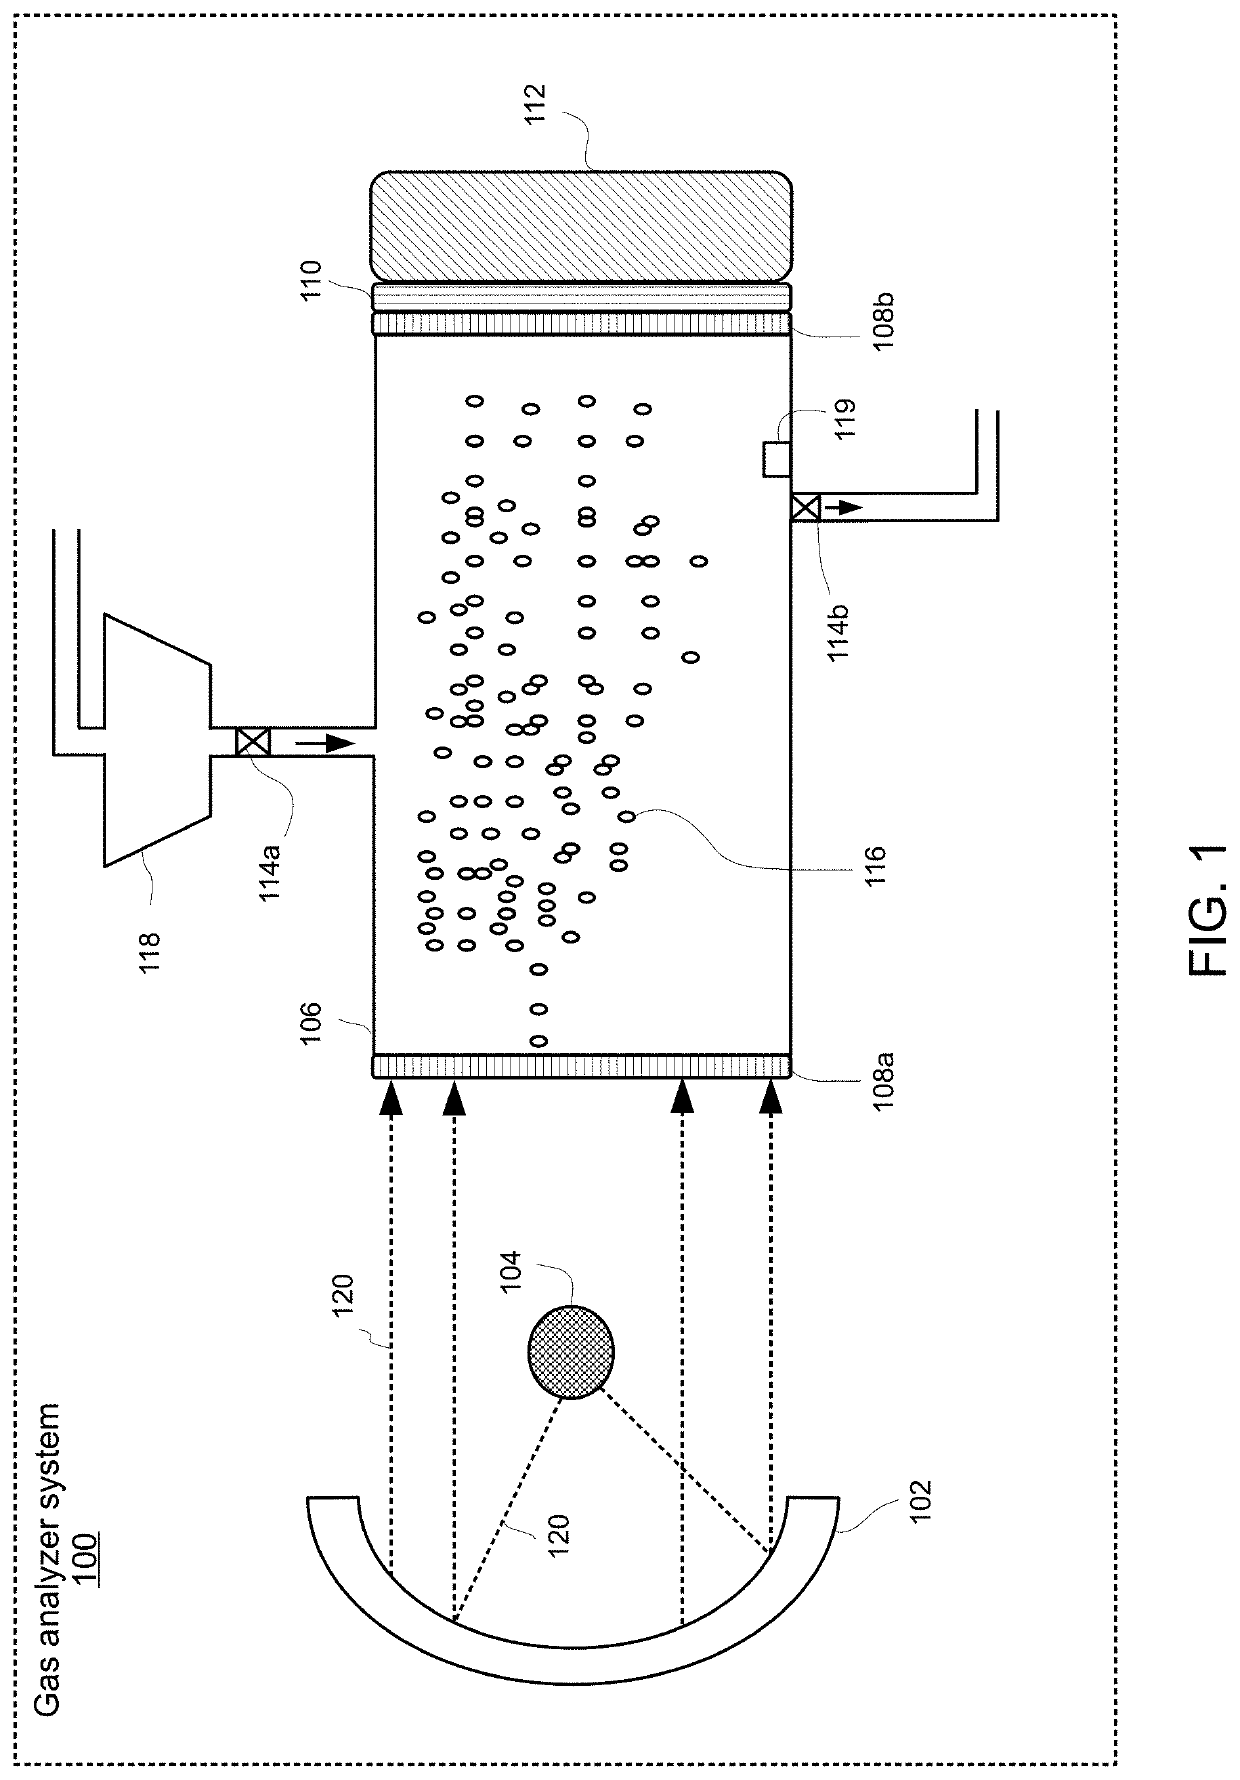 Device for monitoring gas emissions and determining concentration of target gas